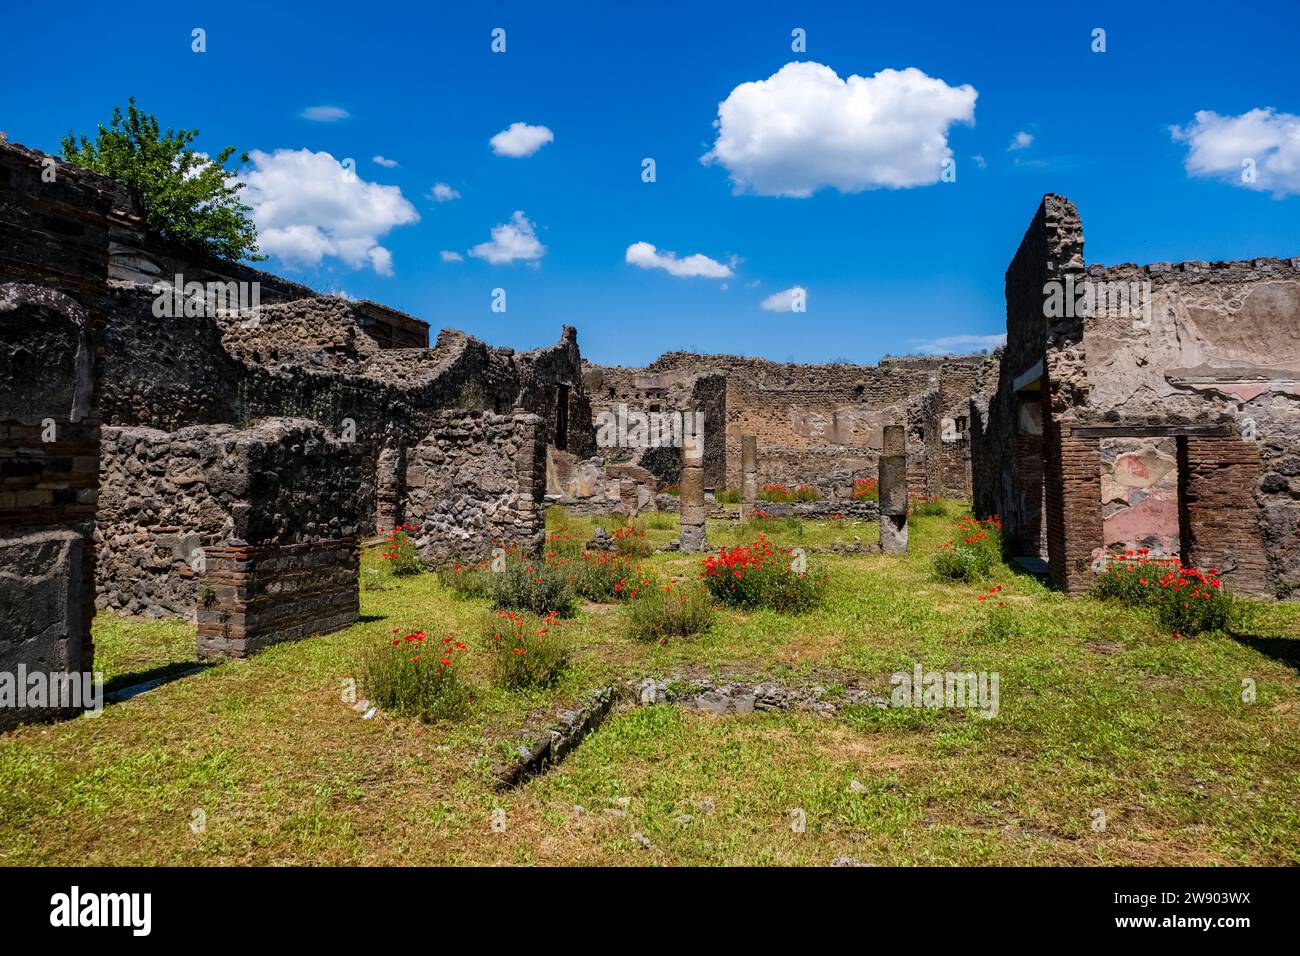 Ruins in Via dell'Abbondanza in the archaeological site of Pompeii, an ancient city destroyed by the eruption of Mount Vesuvius in 79 AD. Stock Photo